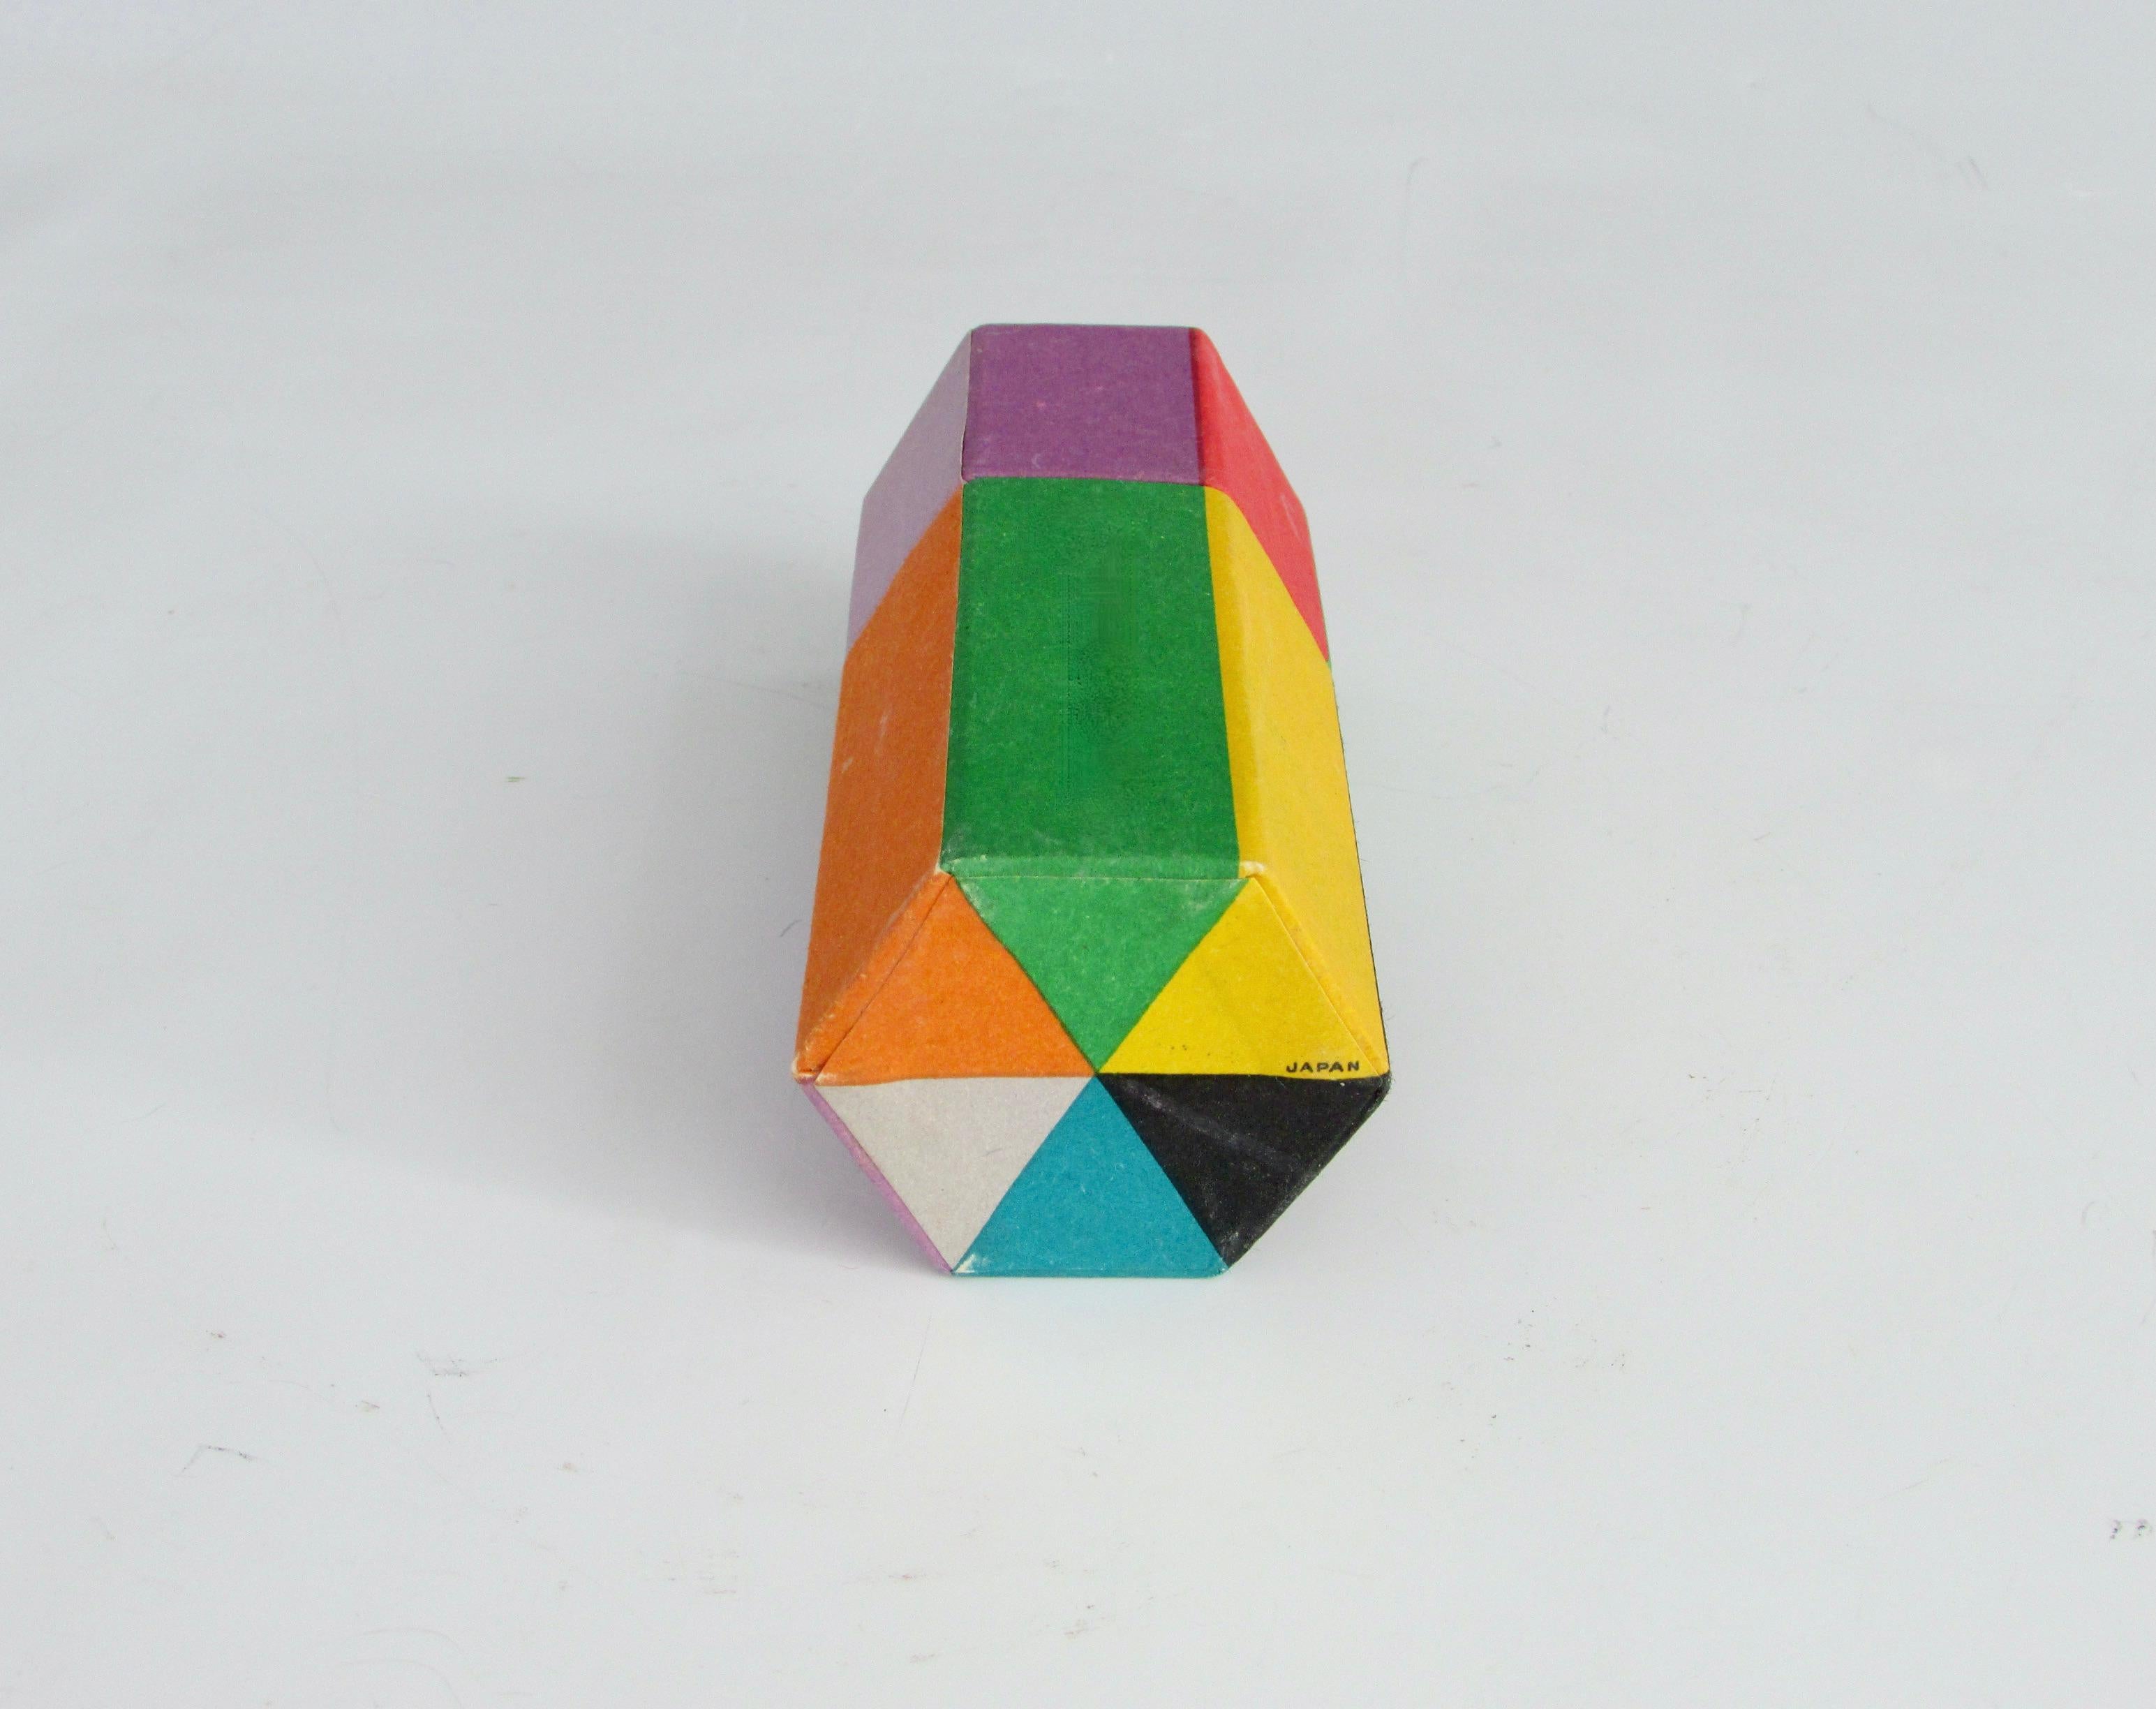 Japanese Multi Color Origami Hexagonal Matchbox with Fitted Color Matches For Sale